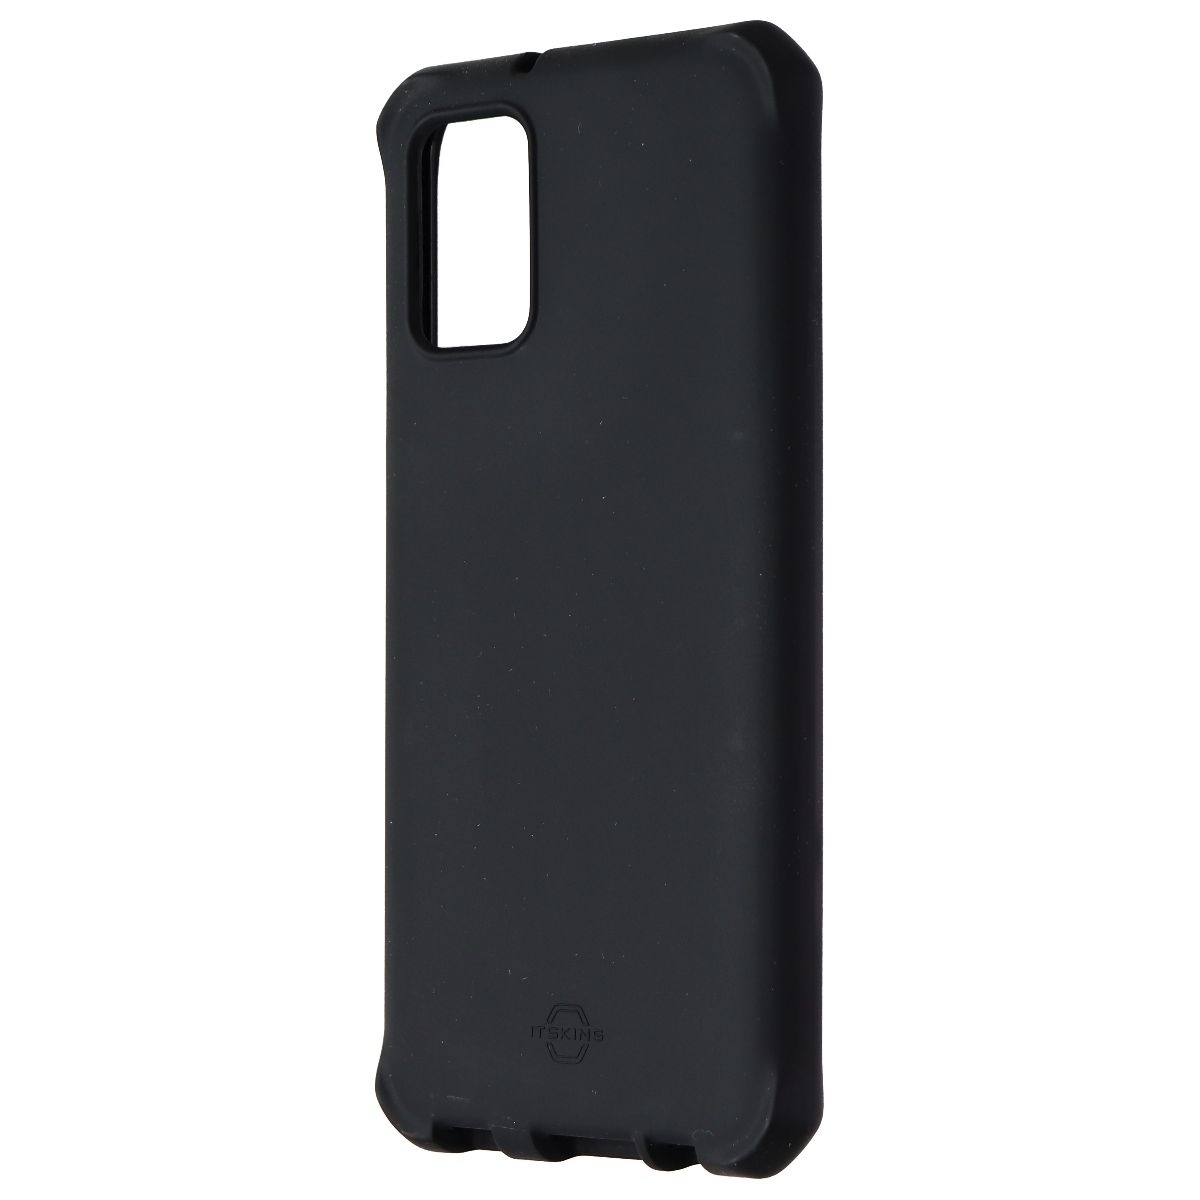 ITSKINS Spectrum Solid Series Case For Samsung Galaxy A02s - Black